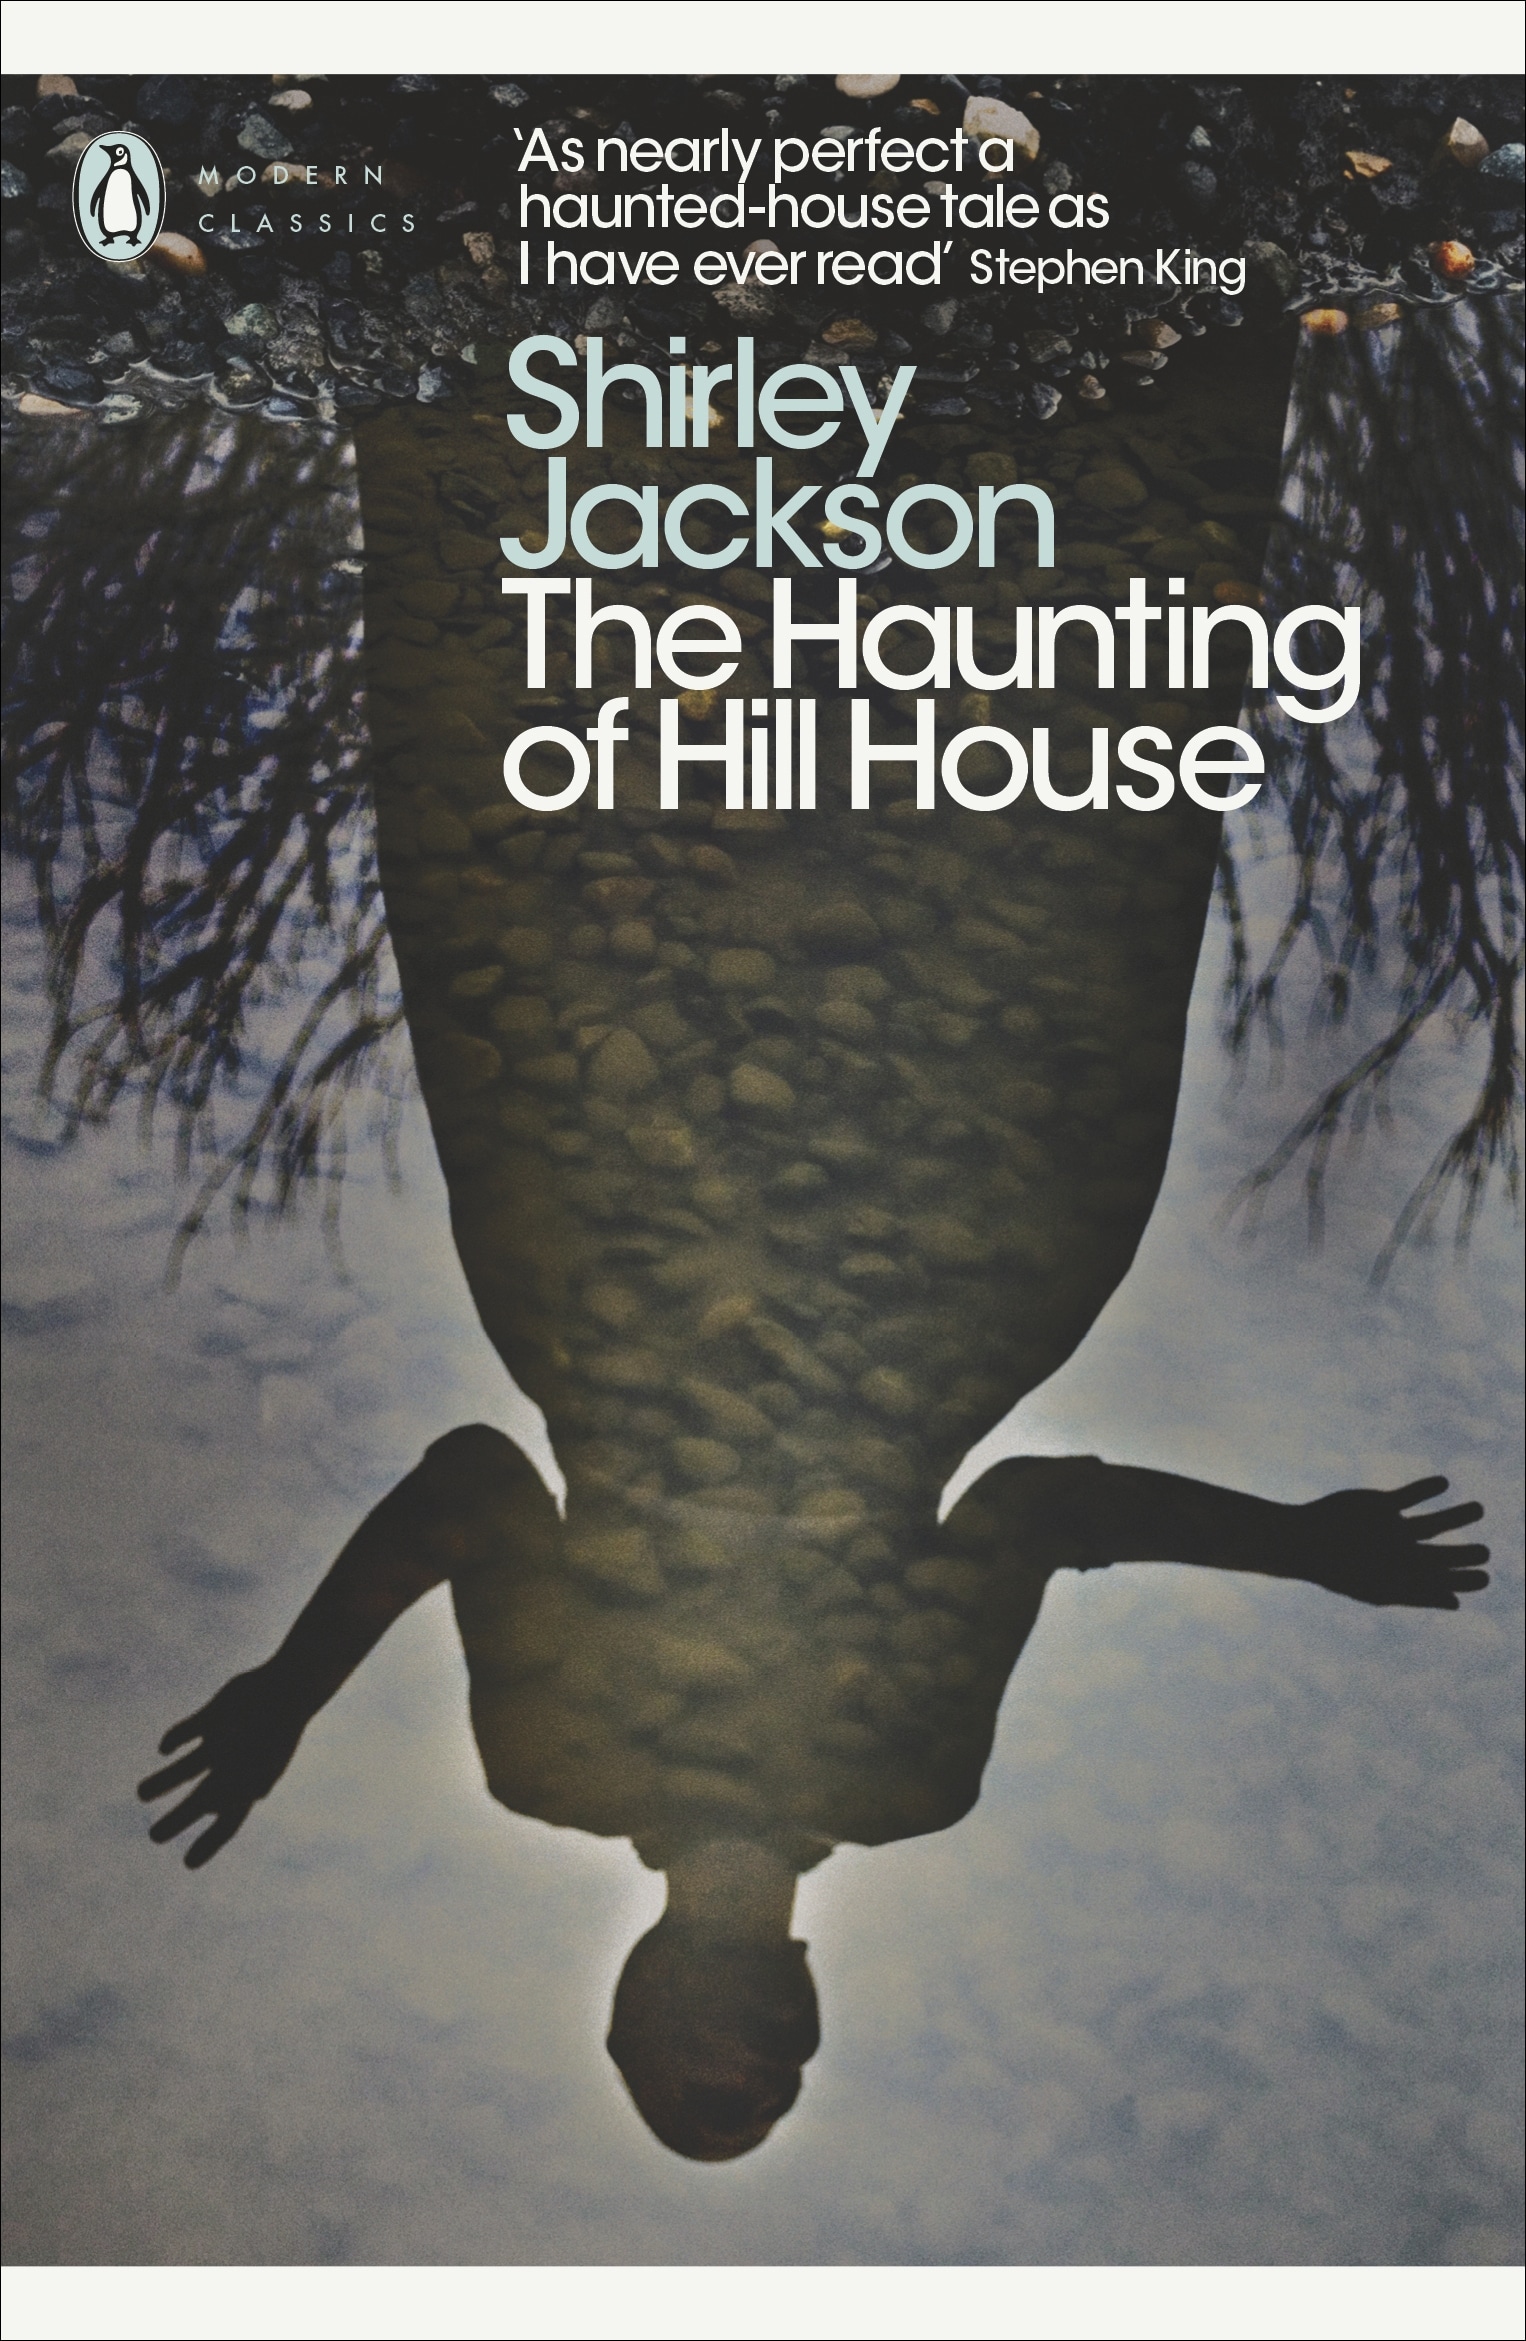 Book “The Haunting of Hill House” by Shirley Jackson — October 1, 2009